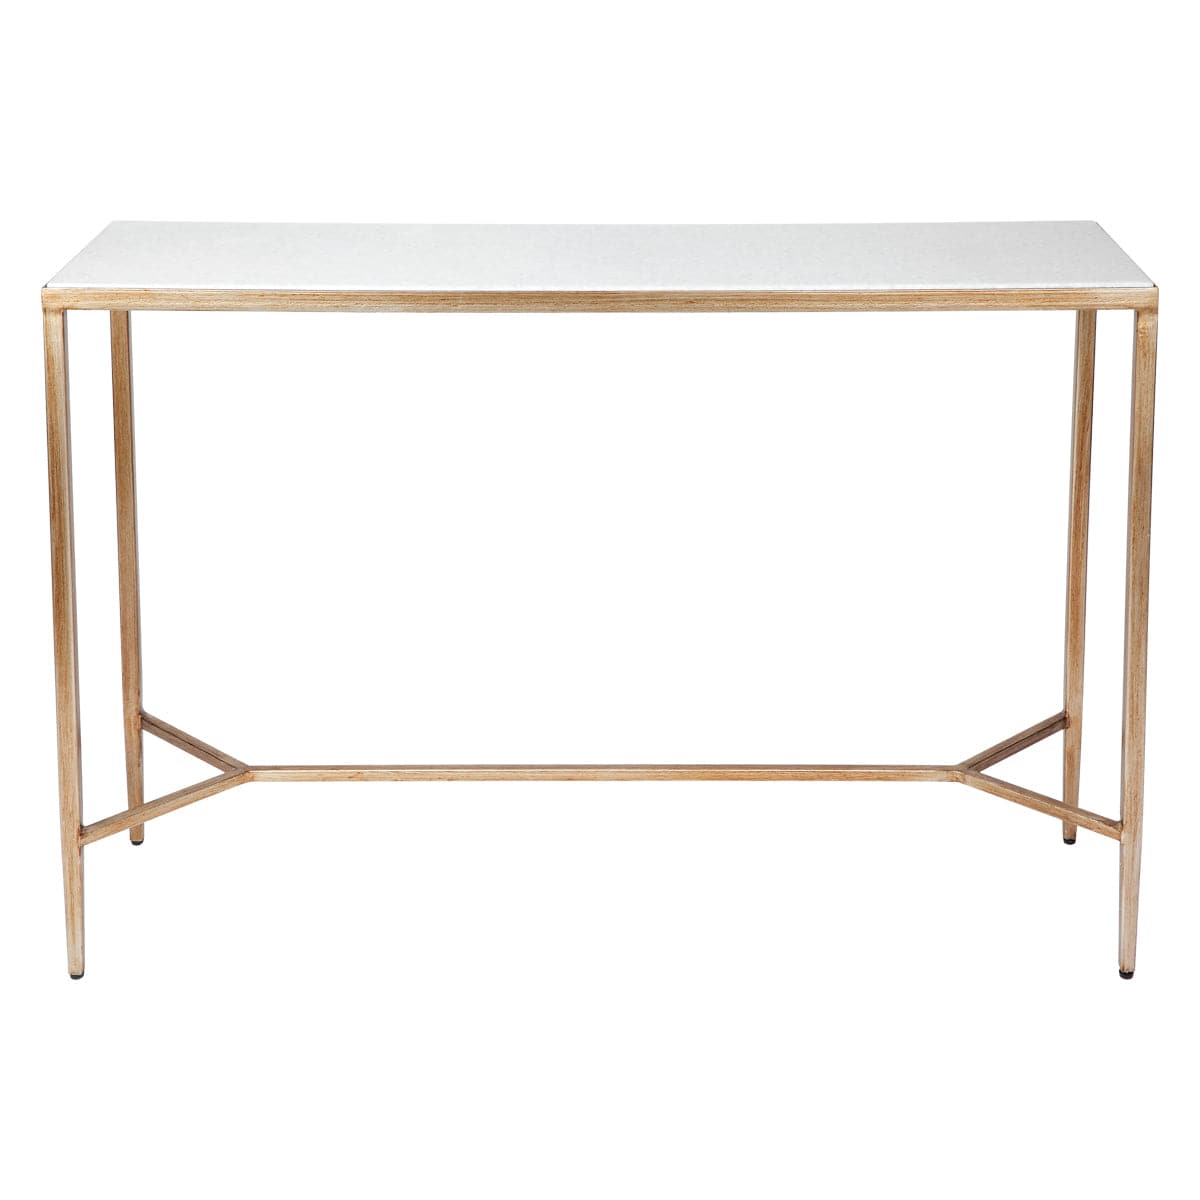 Cafe Lighting & Living Chloe Console Table - Small Gold